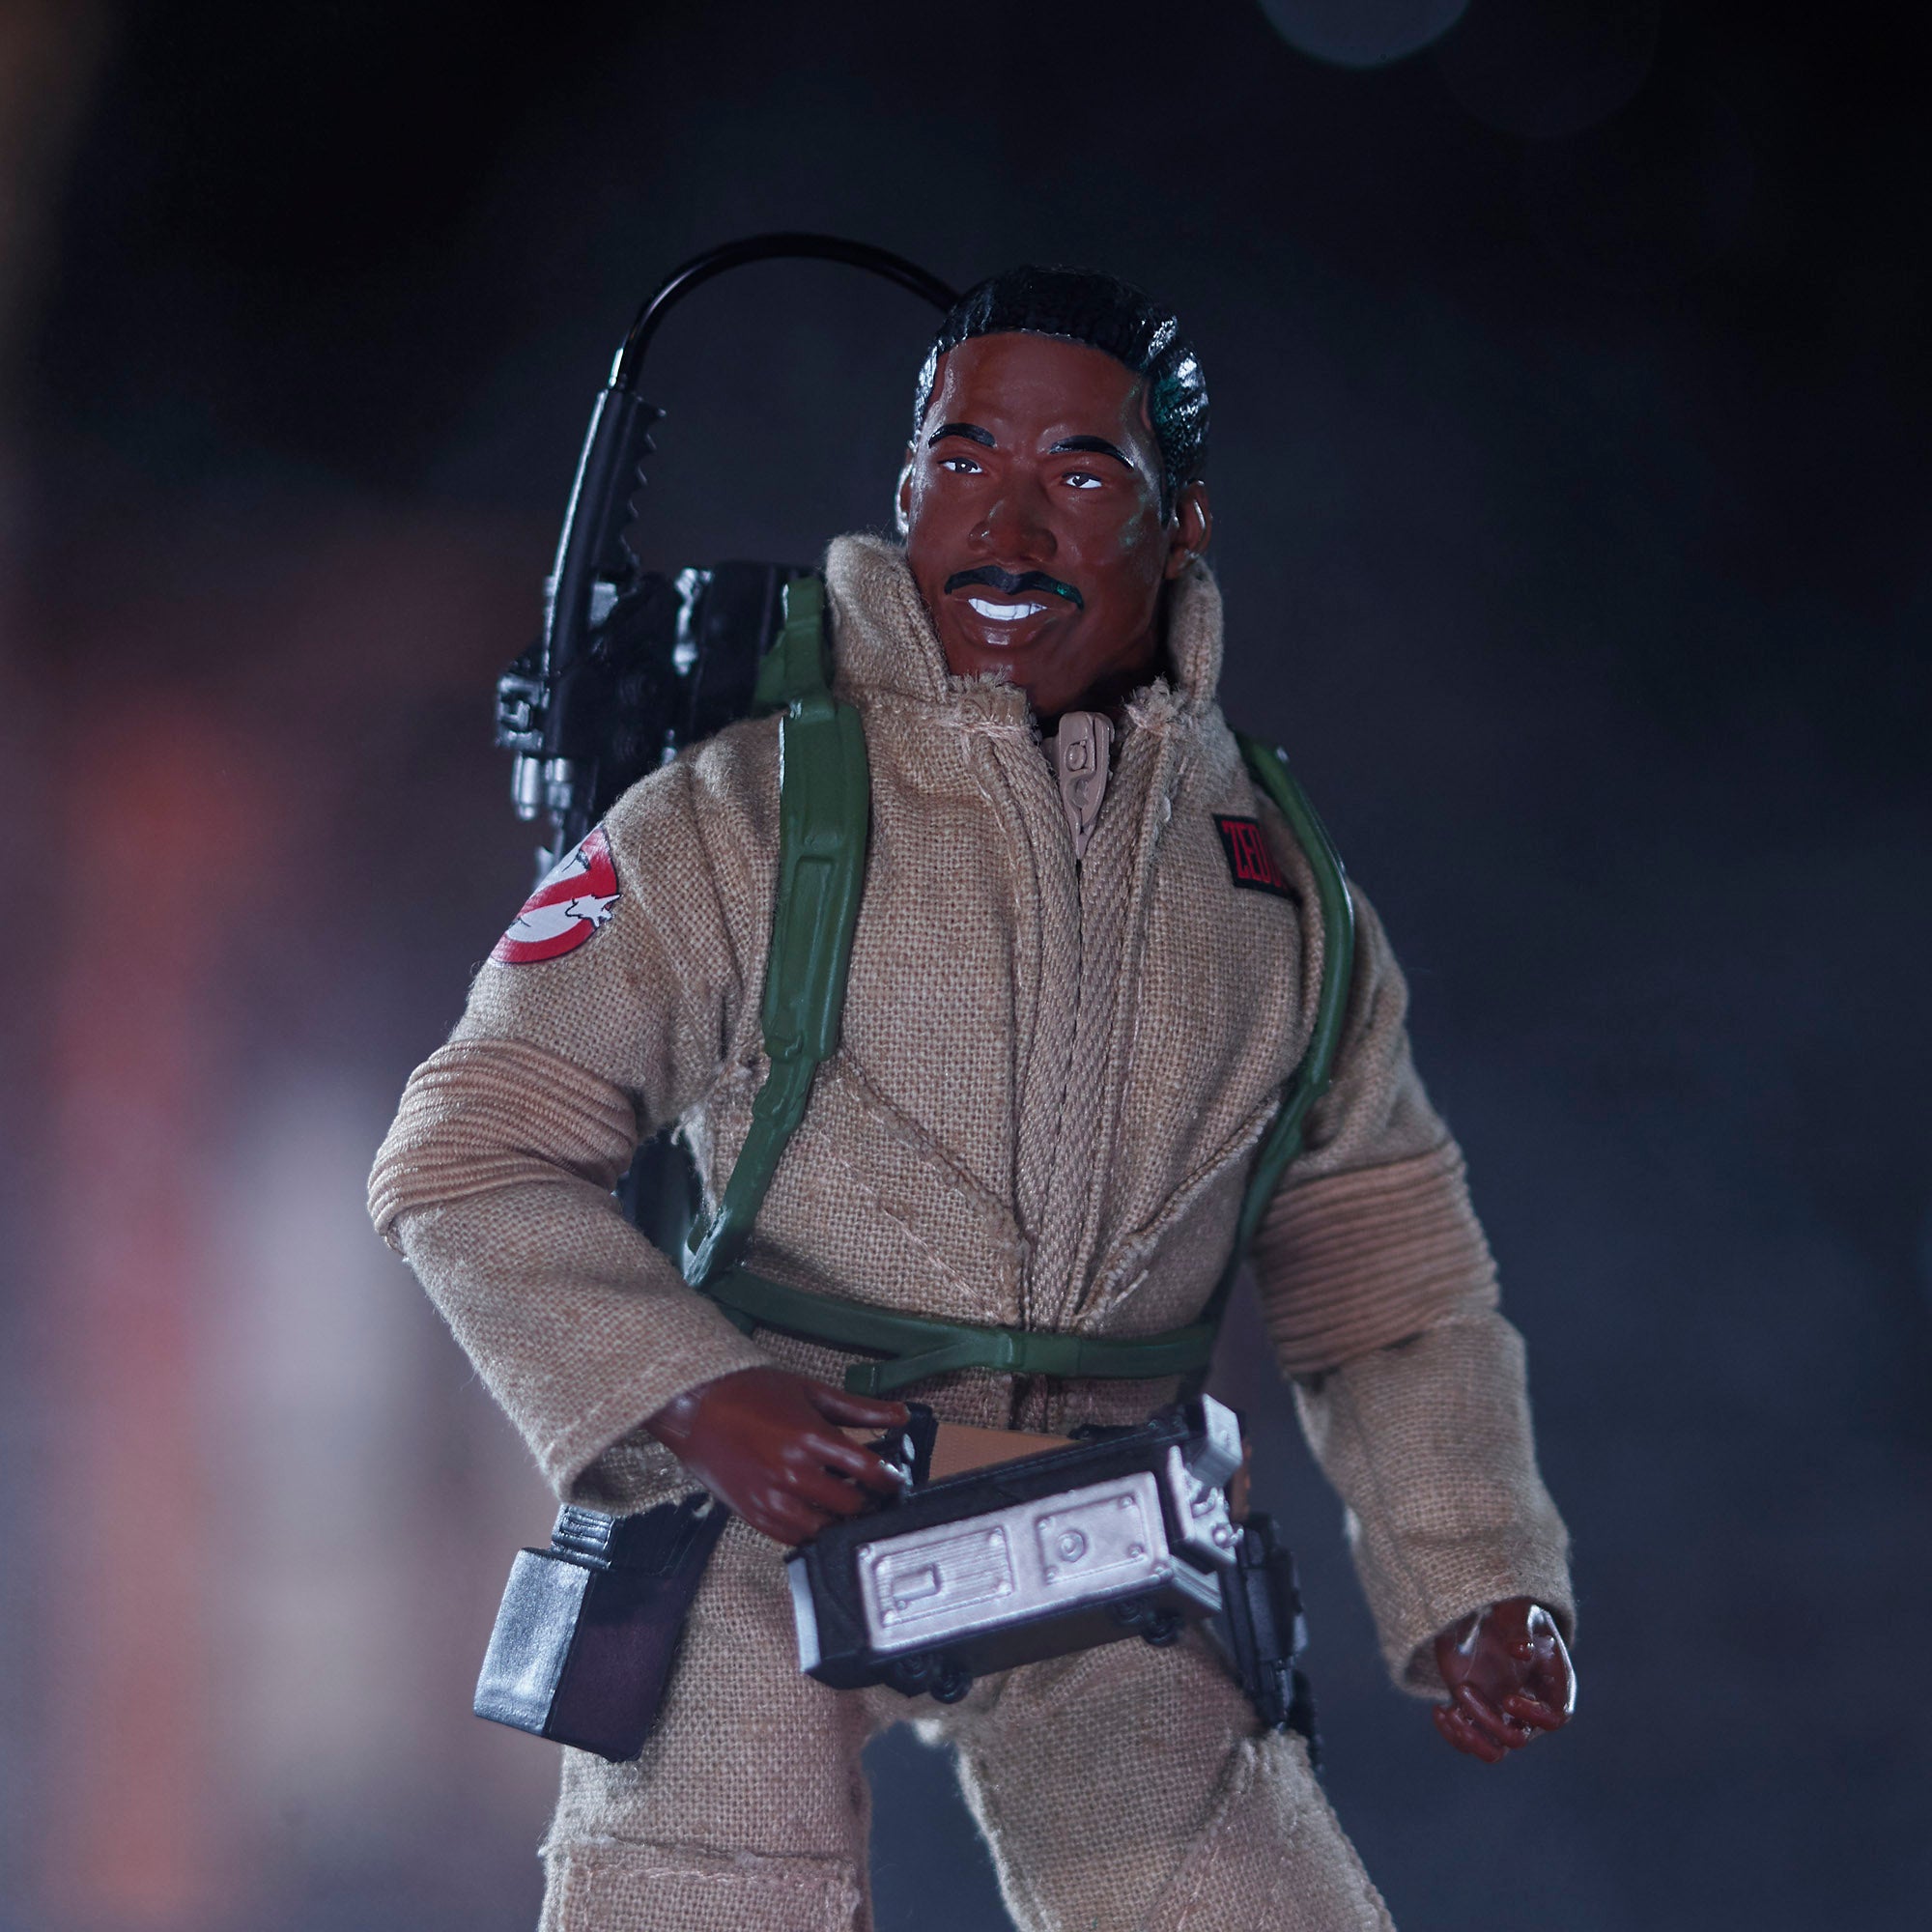 Ghostbusters x Mego 25